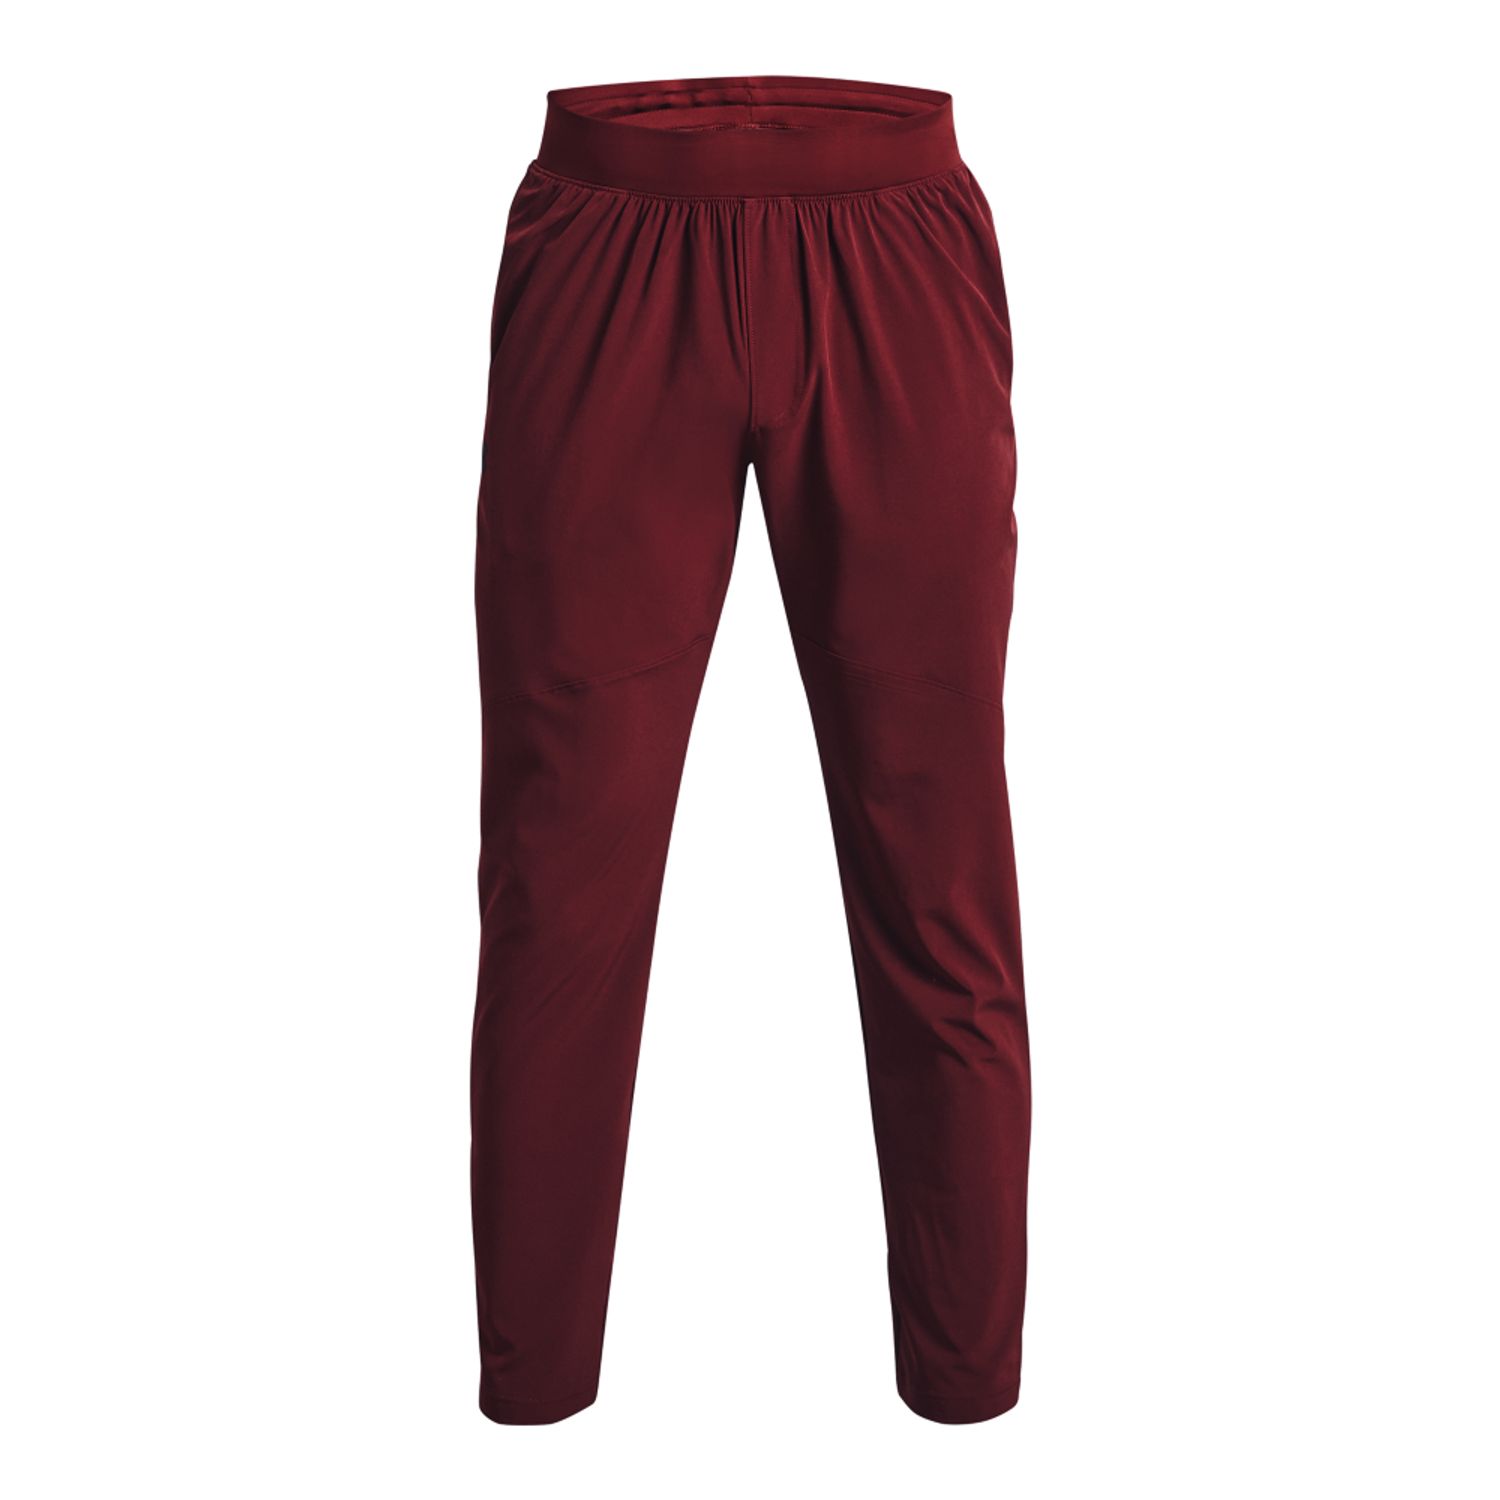 Under Armour Stretch Track Pants for Women